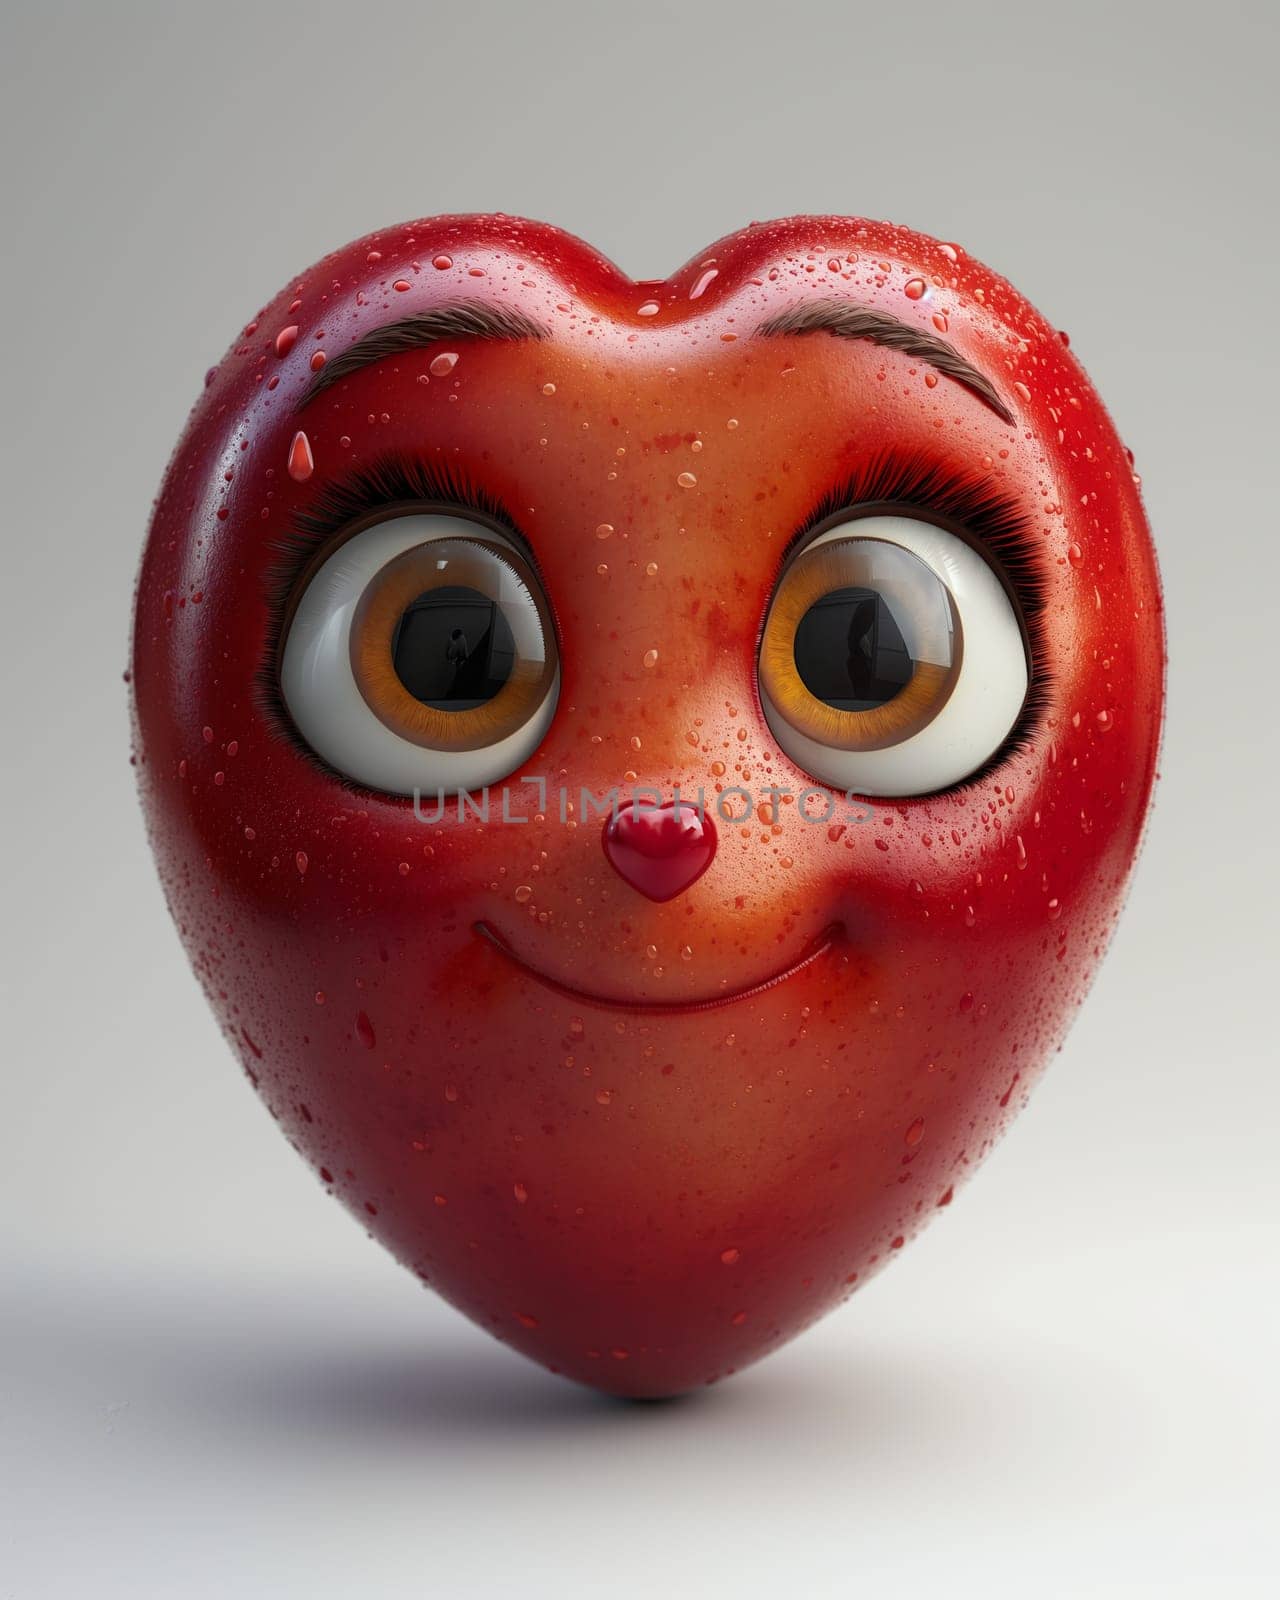 Cartoon, 3D, red heart shaped character. Selective focus.